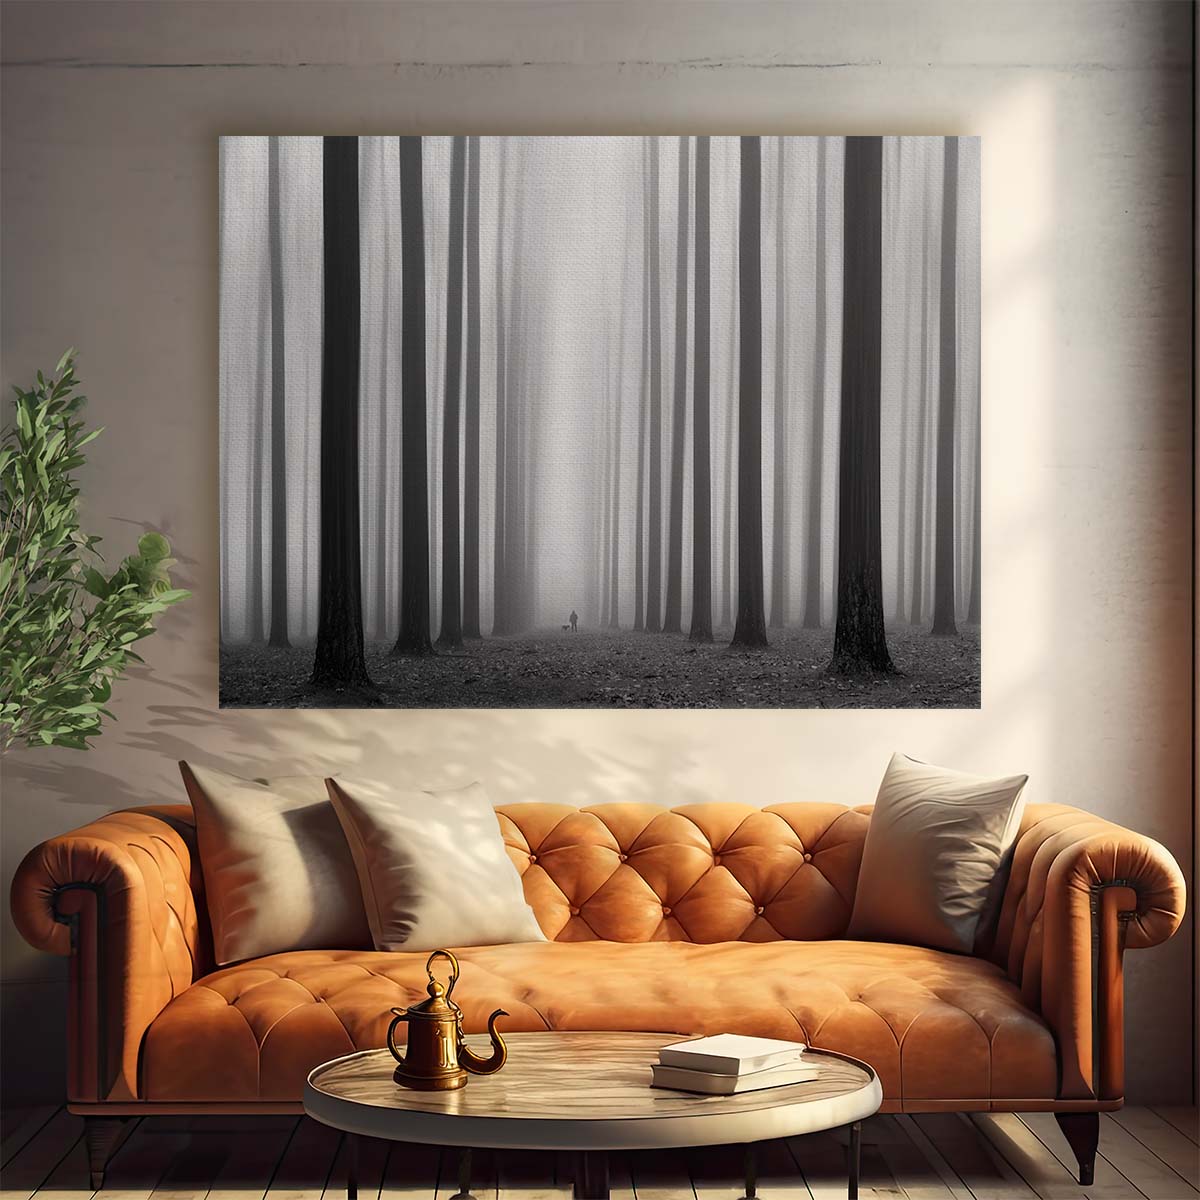 Misty Forest Walk with Dog in Monochrome Wall Art by Luxuriance Designs. Made in USA.